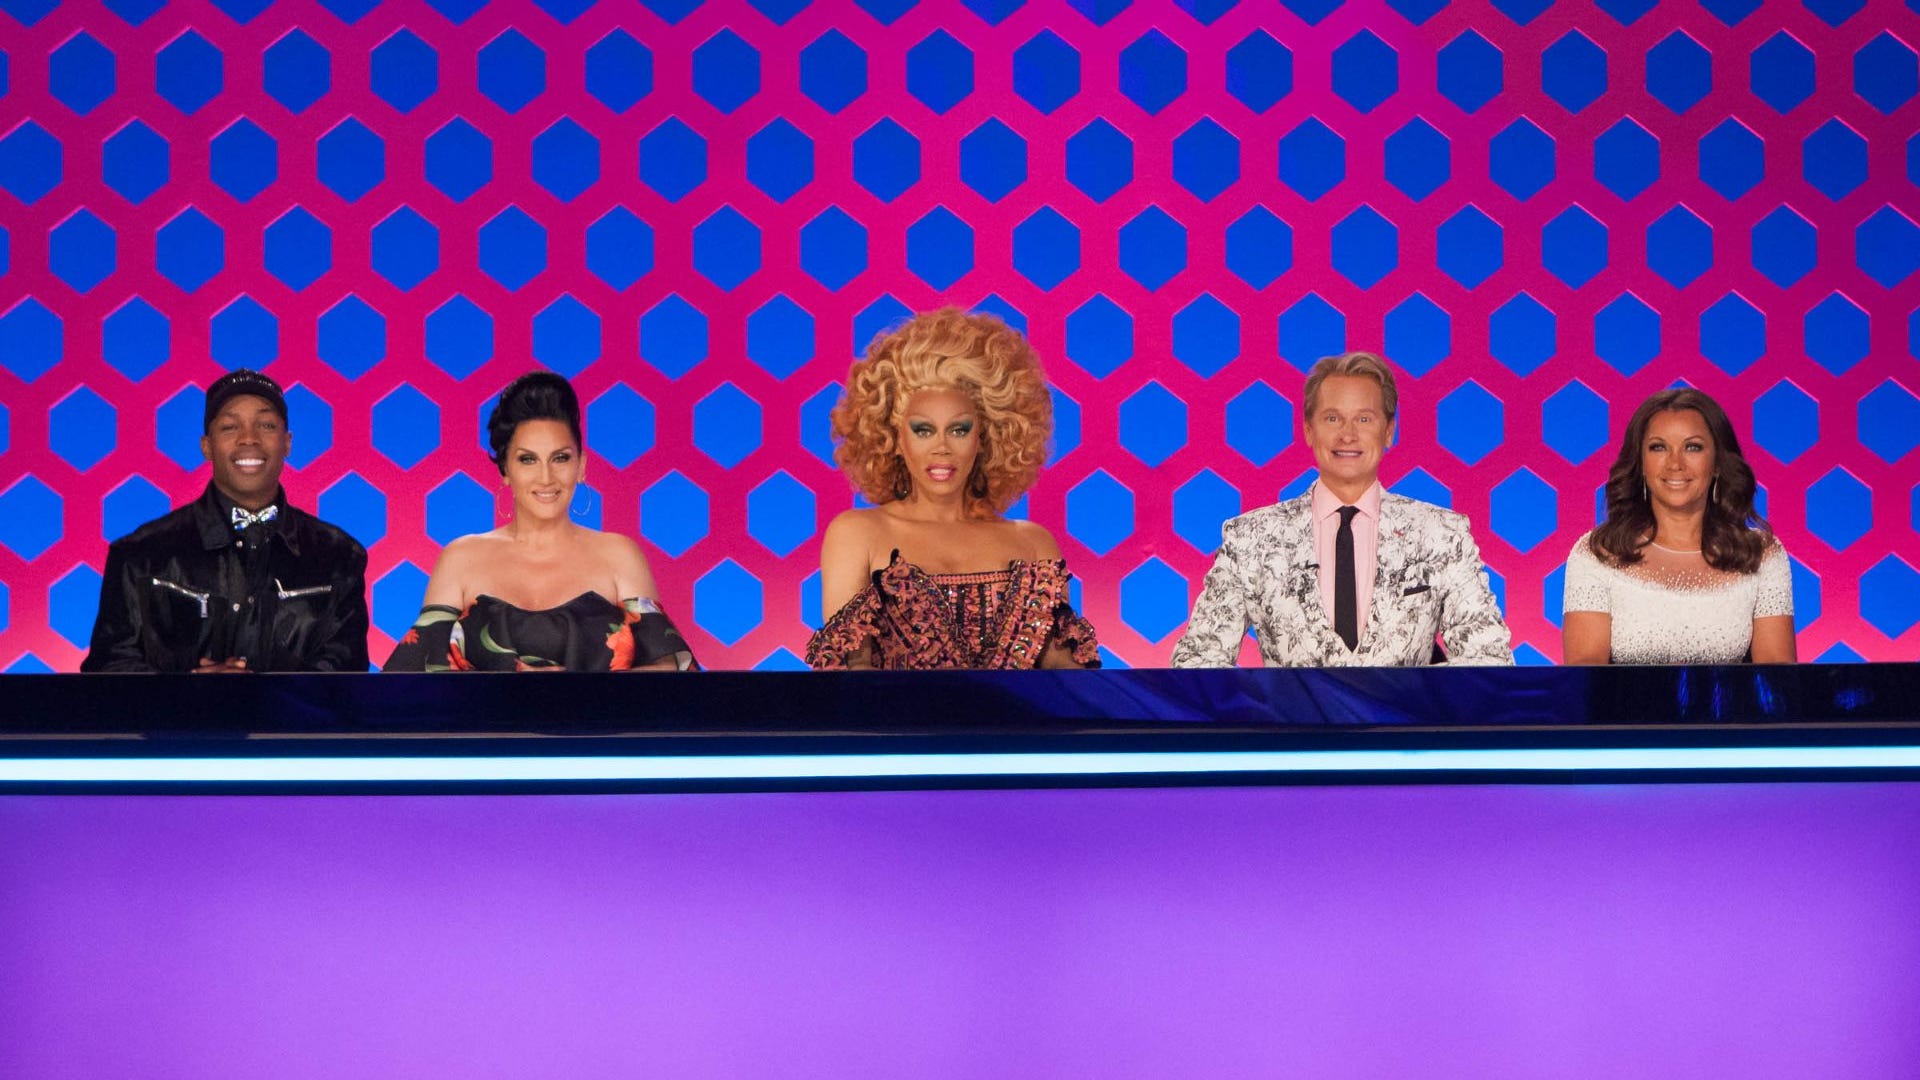 Michelle Visage, RuPaul and Carson Kressly, RuPaul's Drag Race